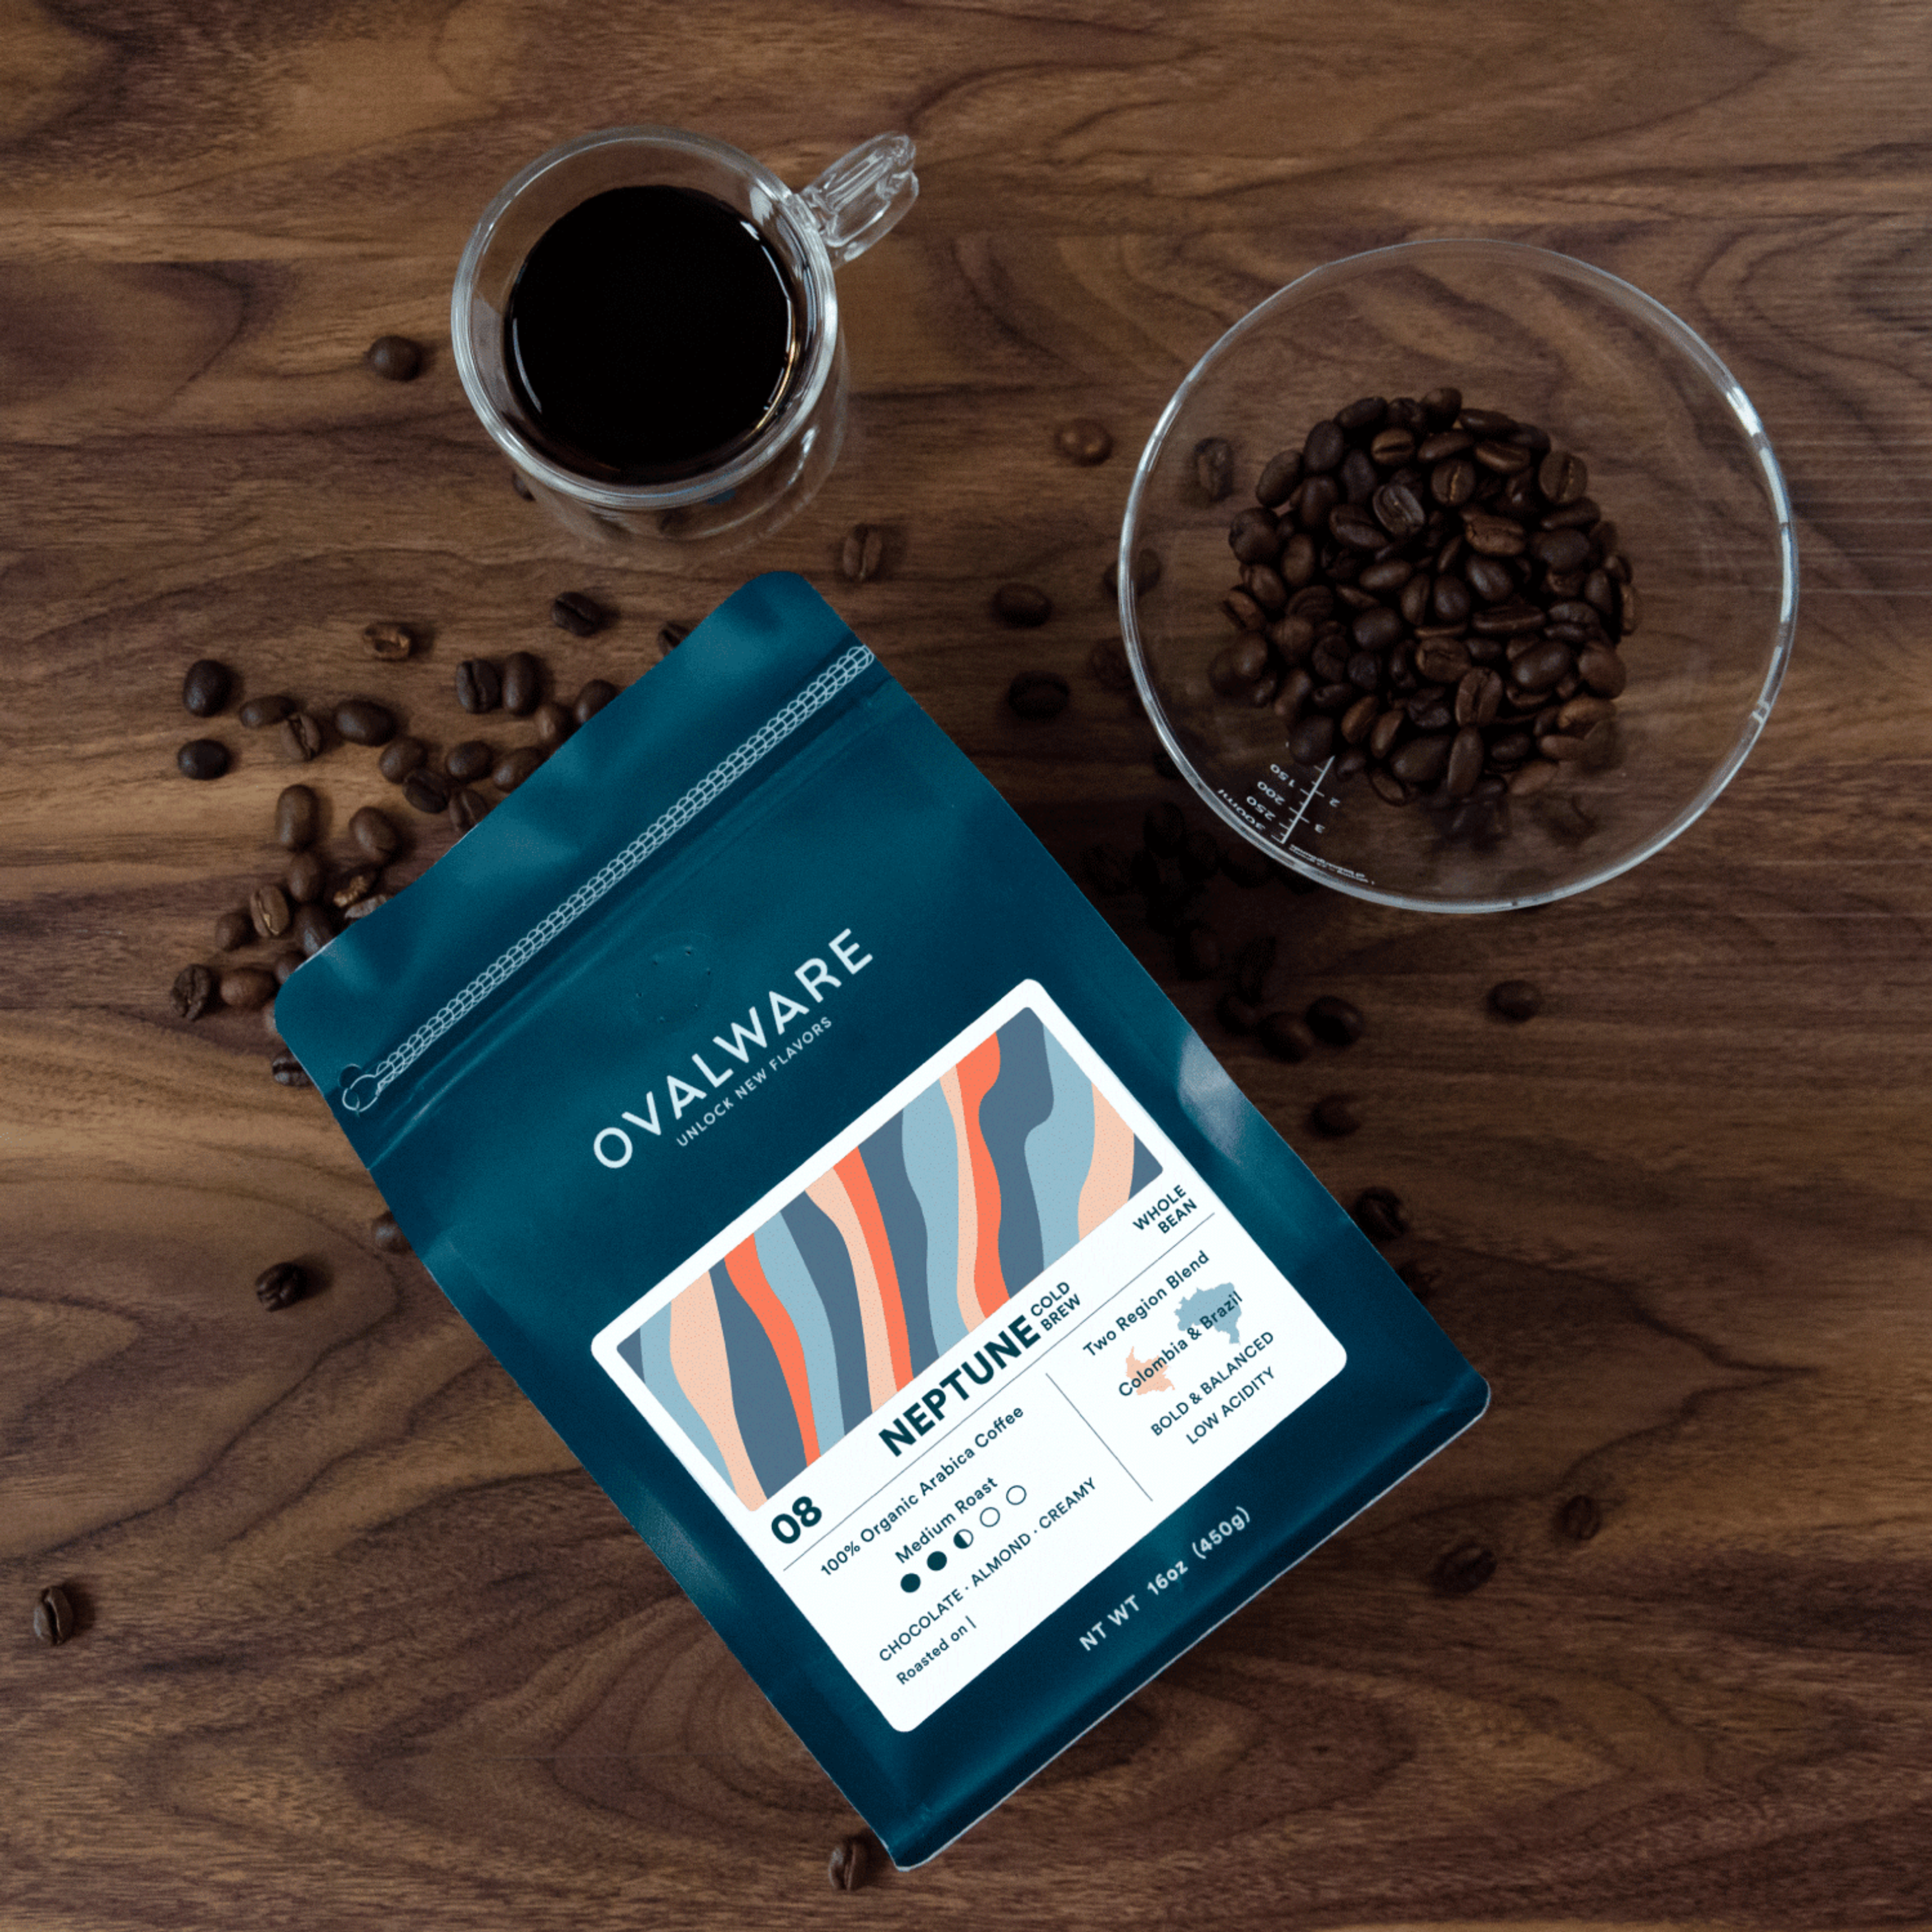 100% Arabica Cold Brew Coffee Beans - Neptune by OVALWARE